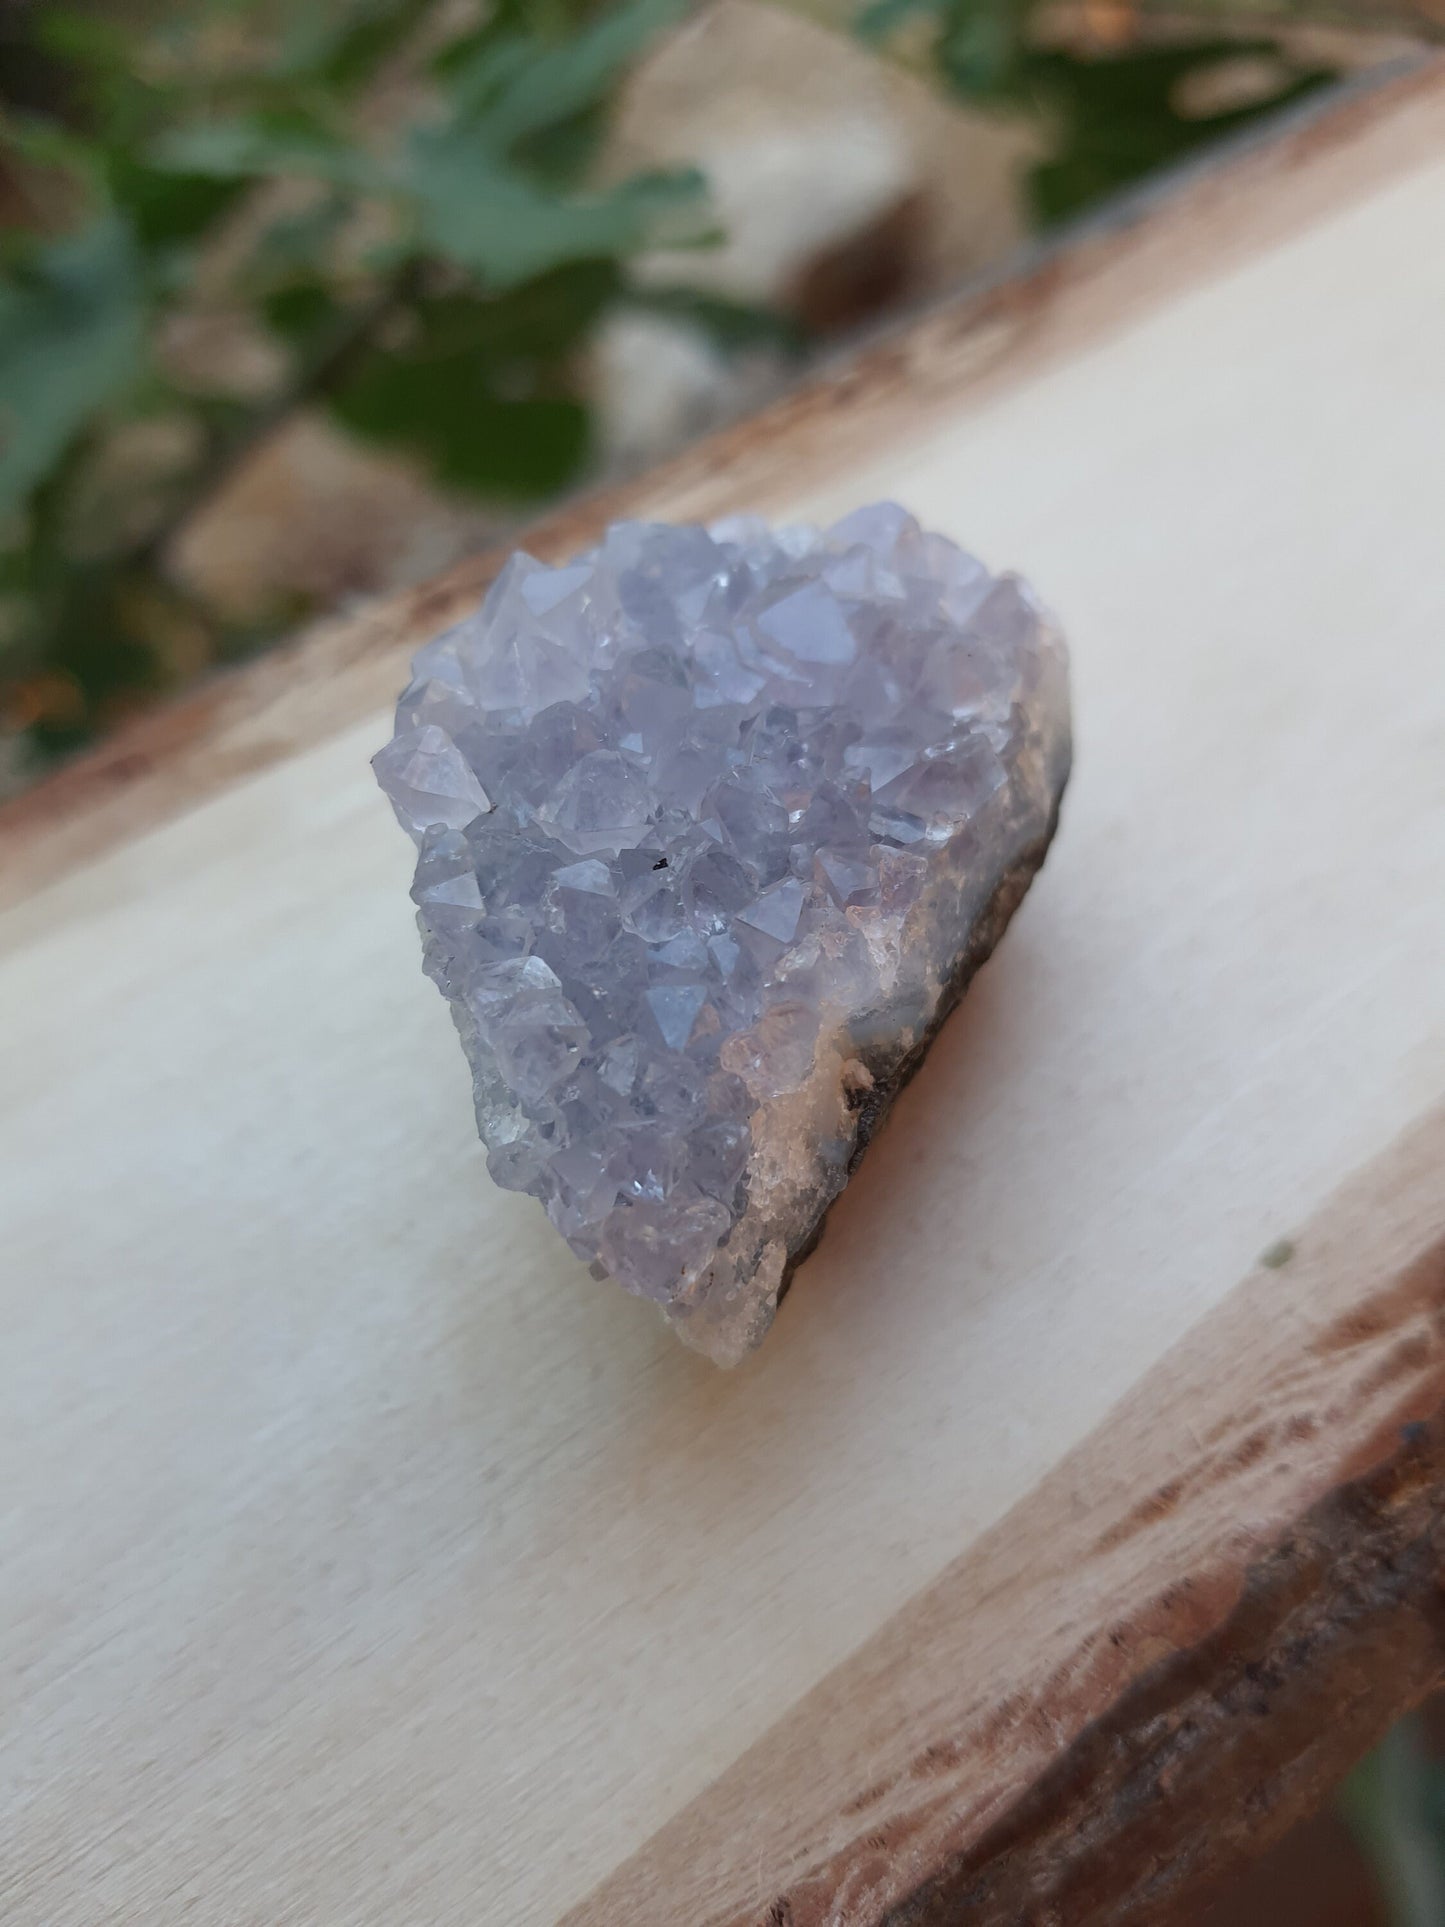 Small Natural Amethyst Crystal Cluster, 48g Healing Crystal, Mineral Specimen, Mineral Collection